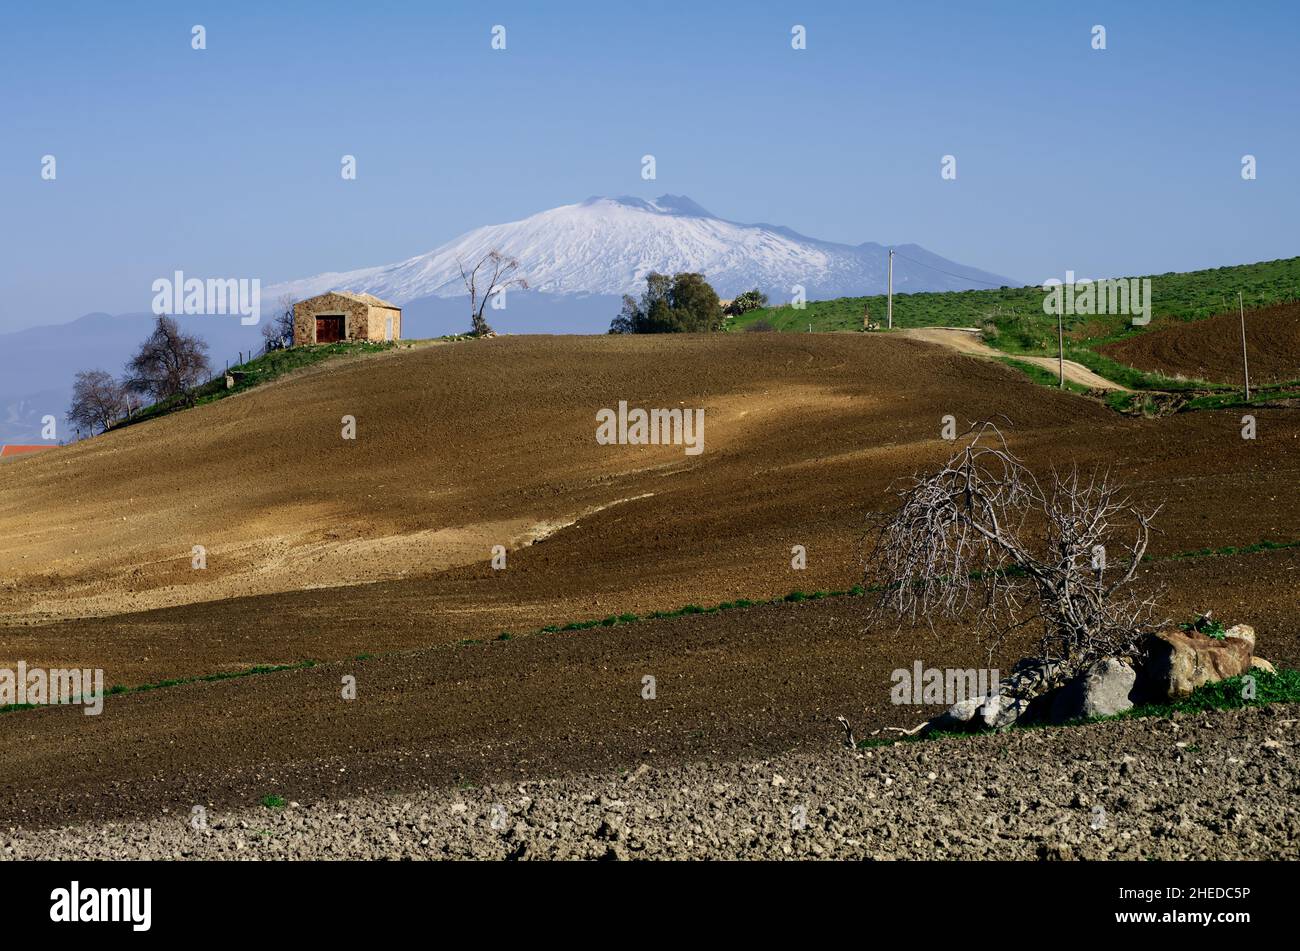 plowed field with a rural house on a hill in the sicilian landscape on the background Etna Mount snow covered Stock Photo